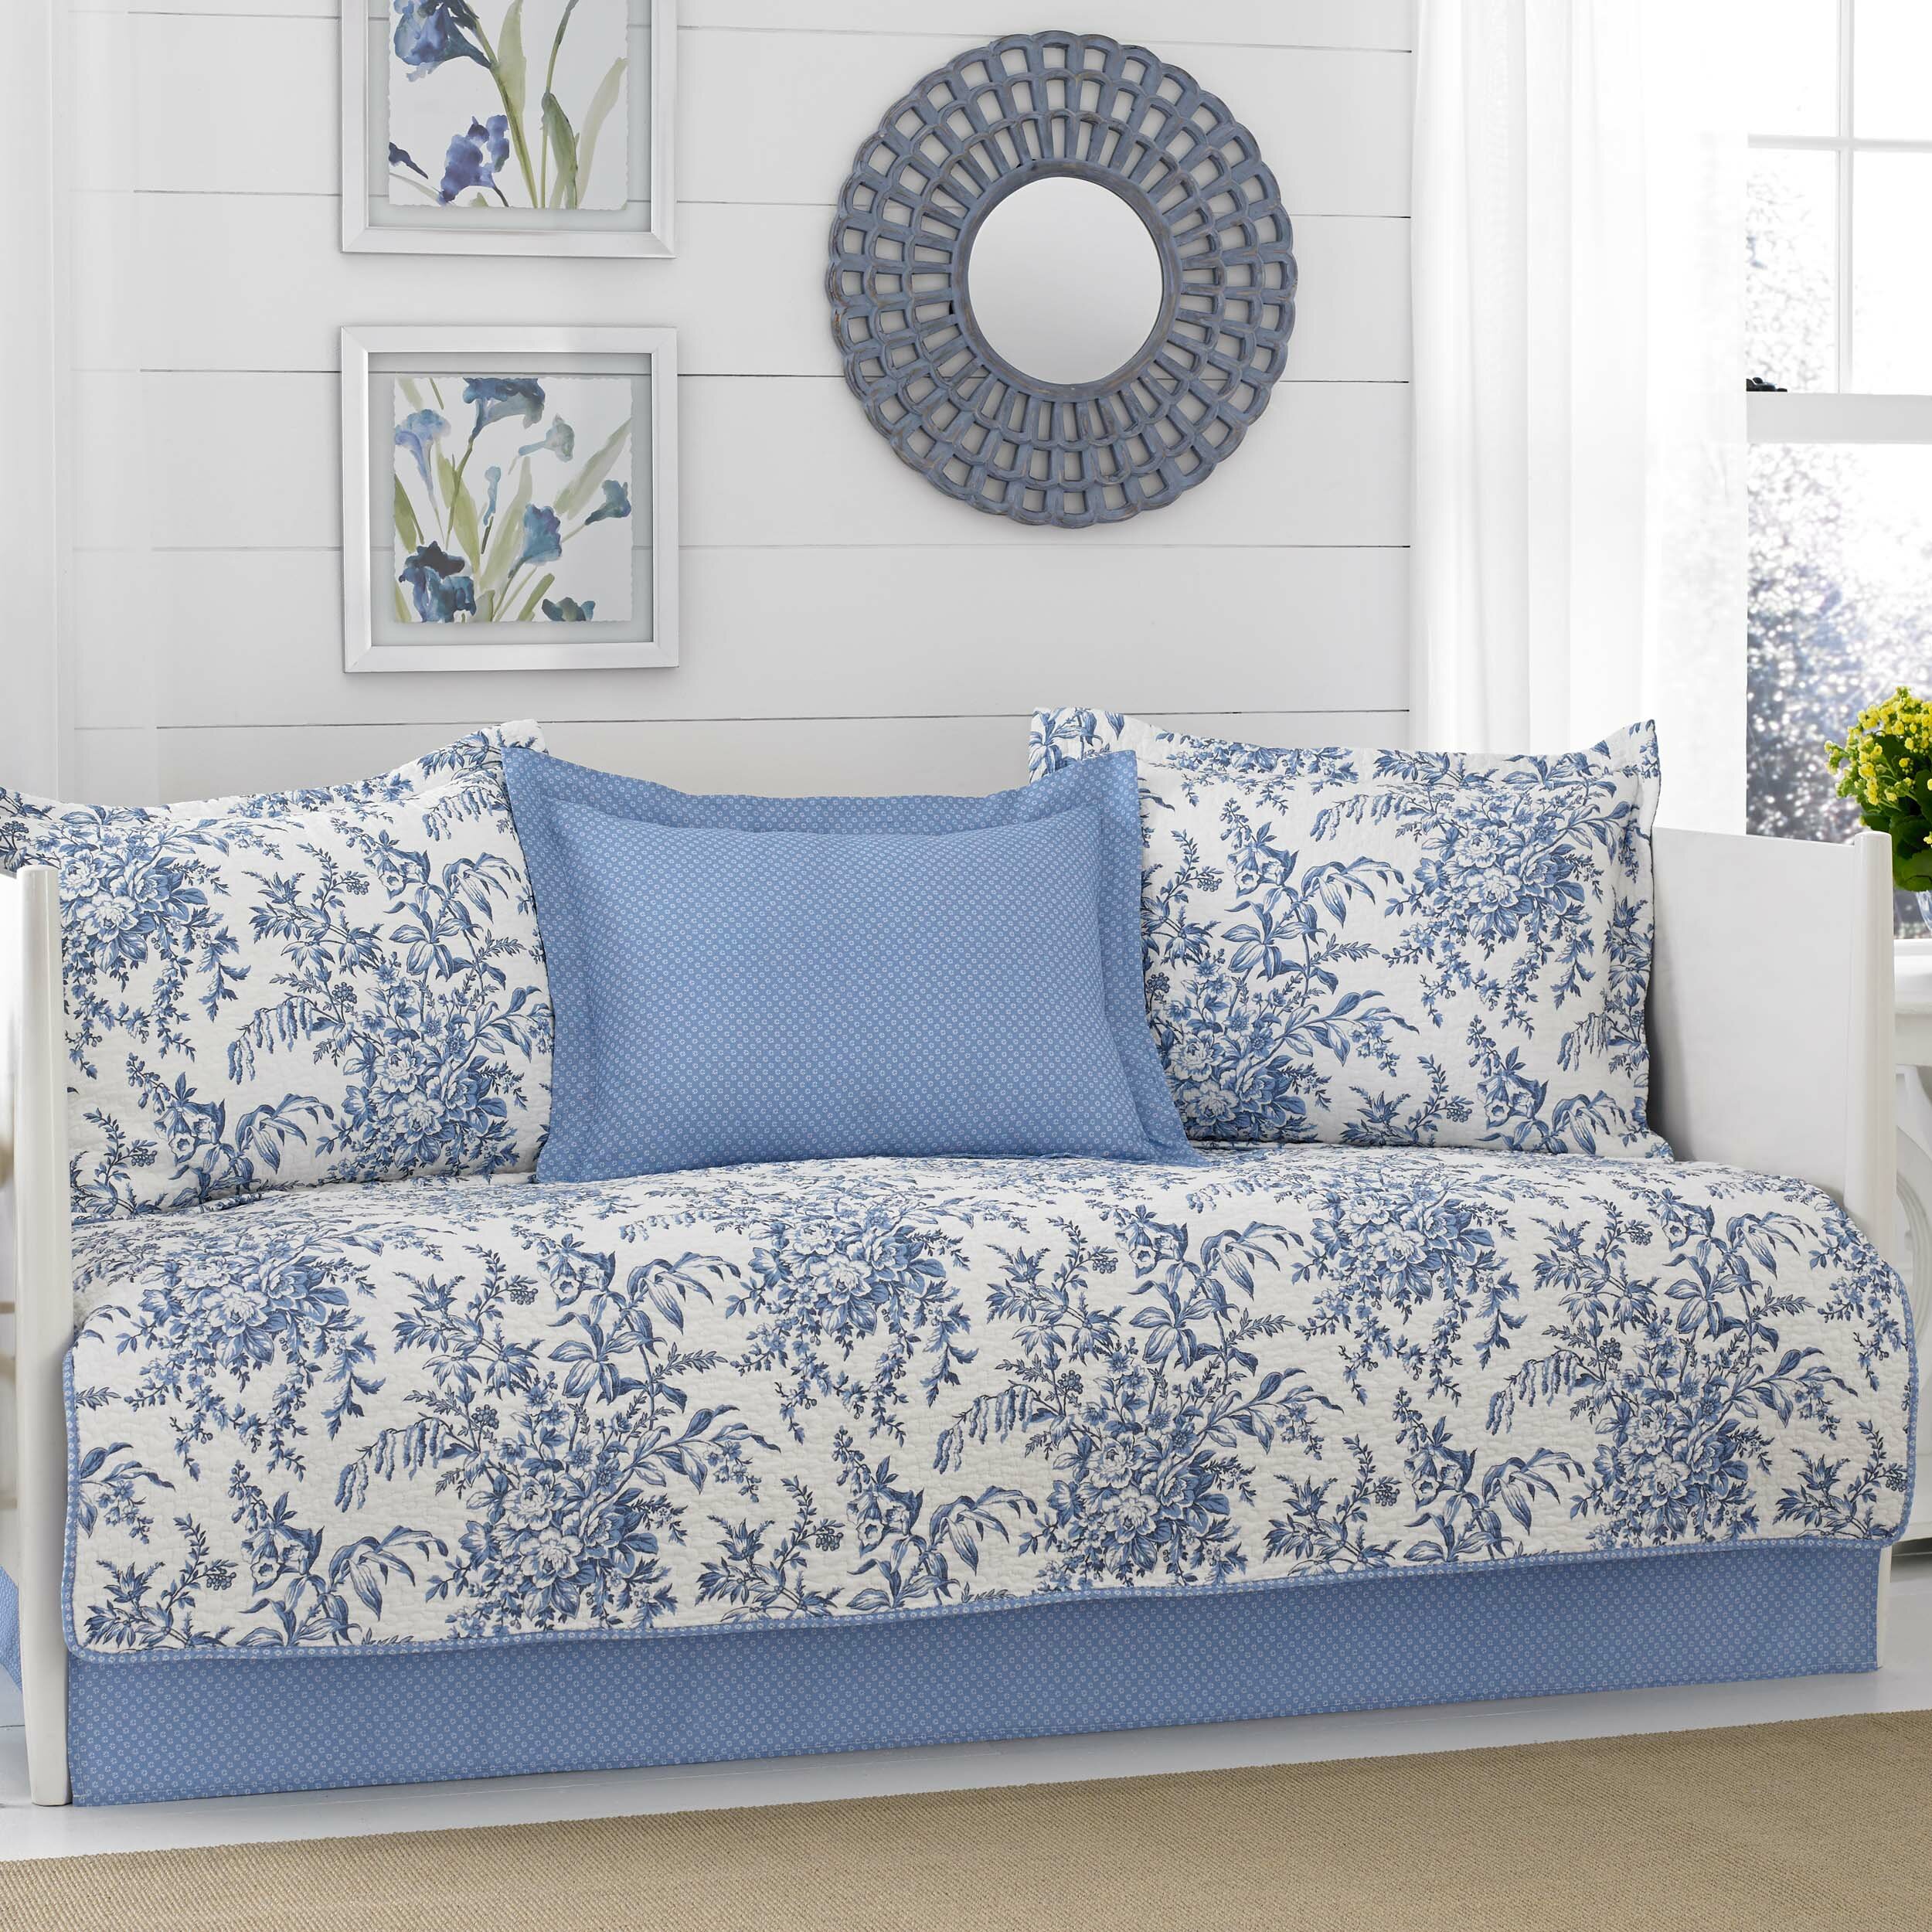 Laura Ashley Home Bedford 5 Piece Daybed Set & Reviews | Wayfair